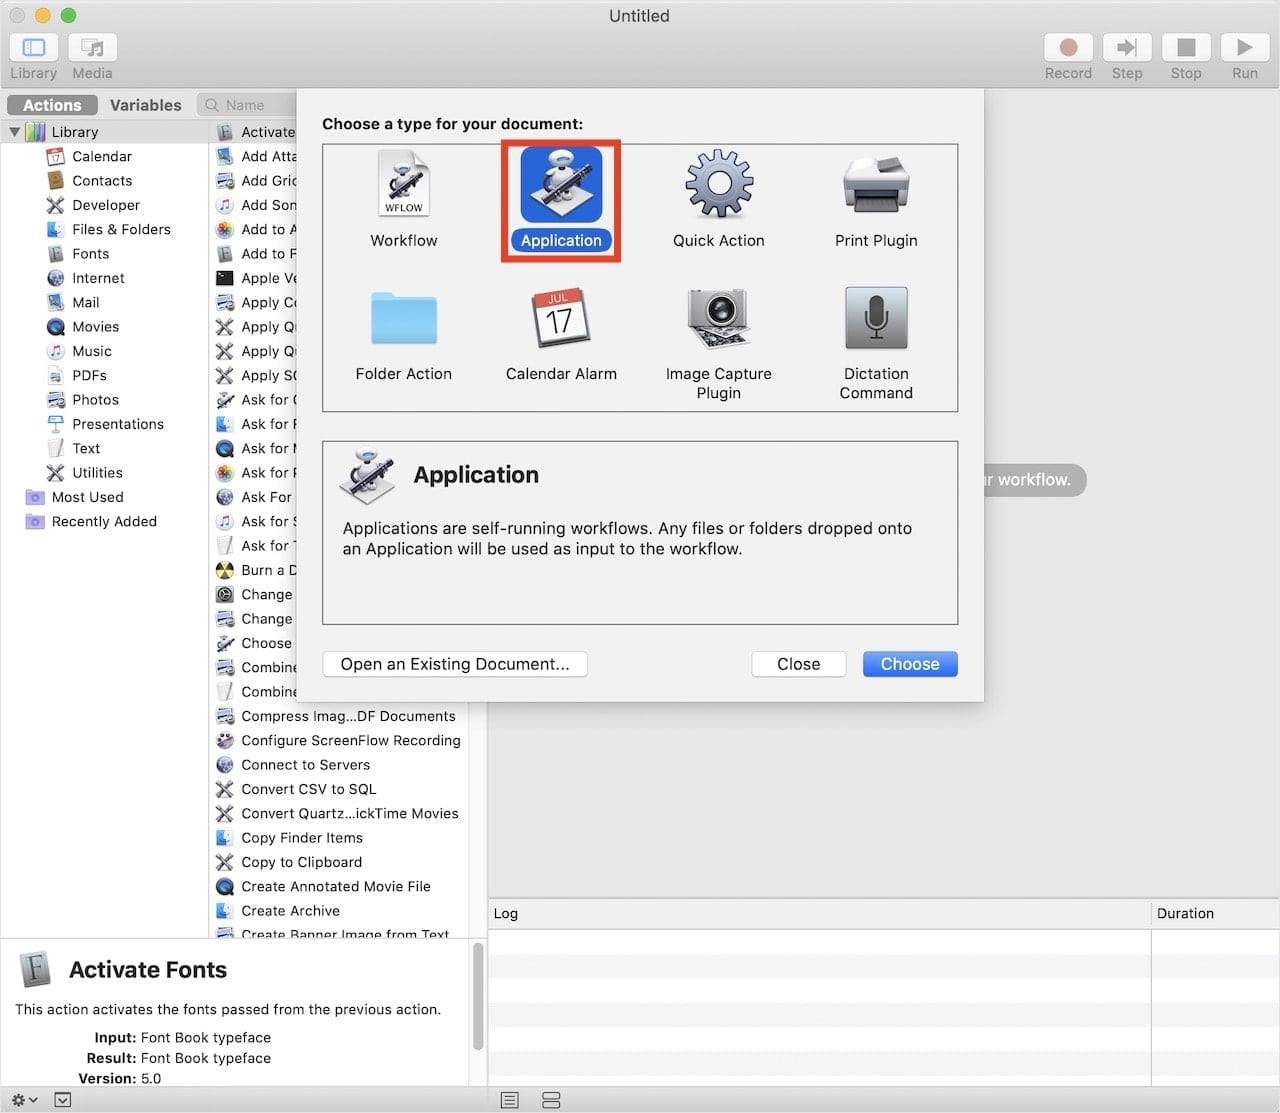 Select "Application" as the type of Automator document to be created, then click the Choose button.